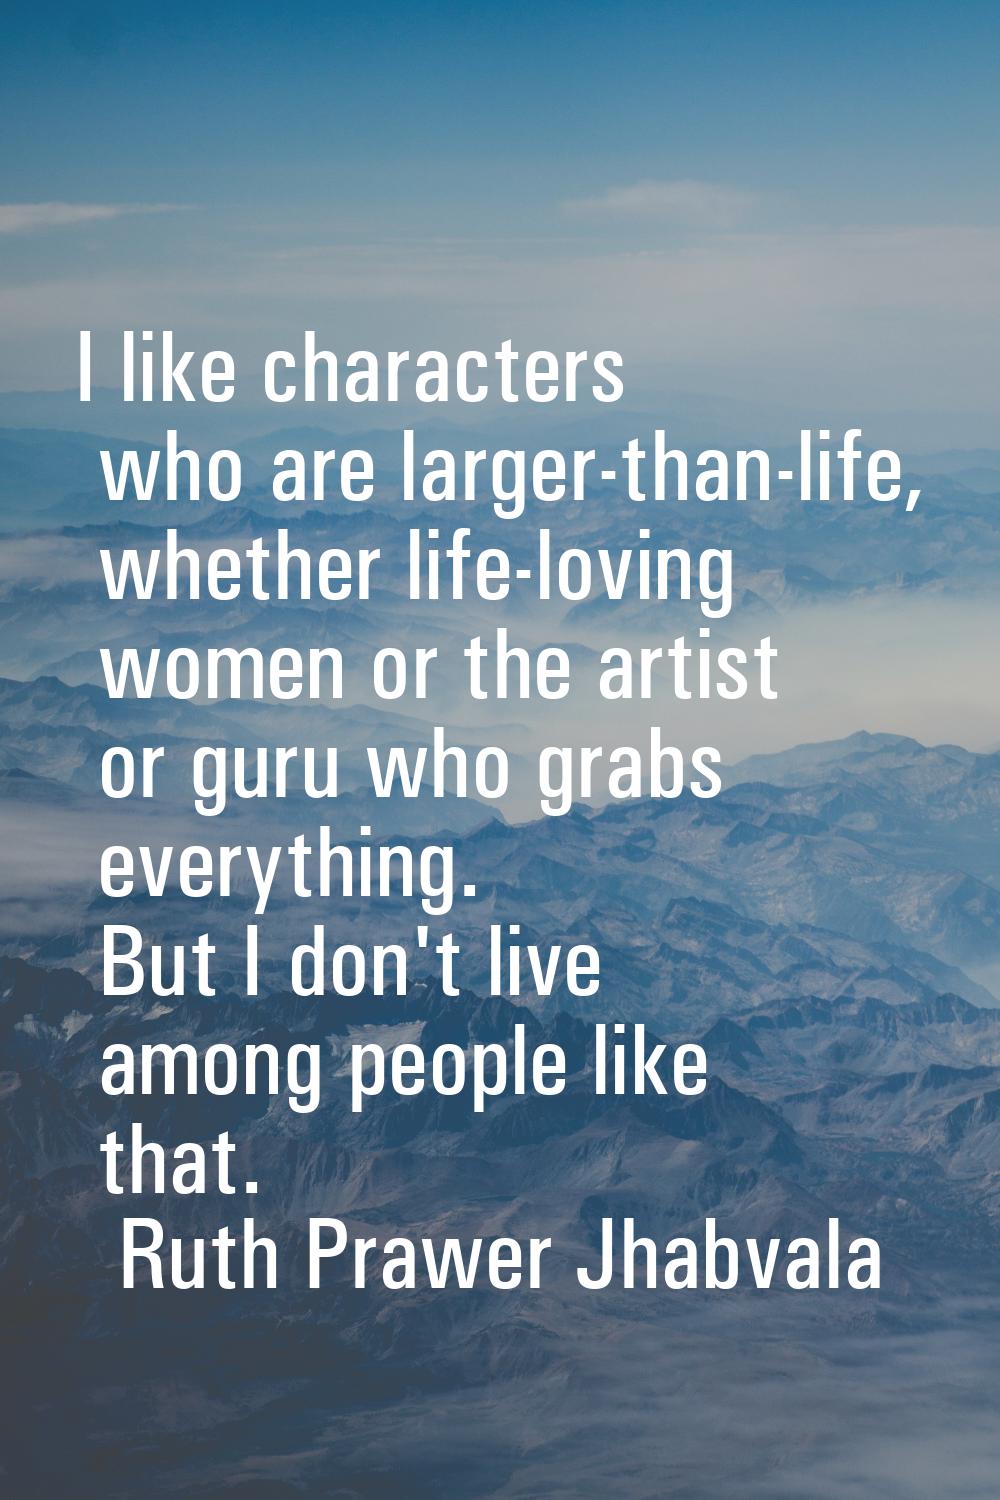 I like characters who are larger-than-life, whether life-loving women or the artist or guru who gra